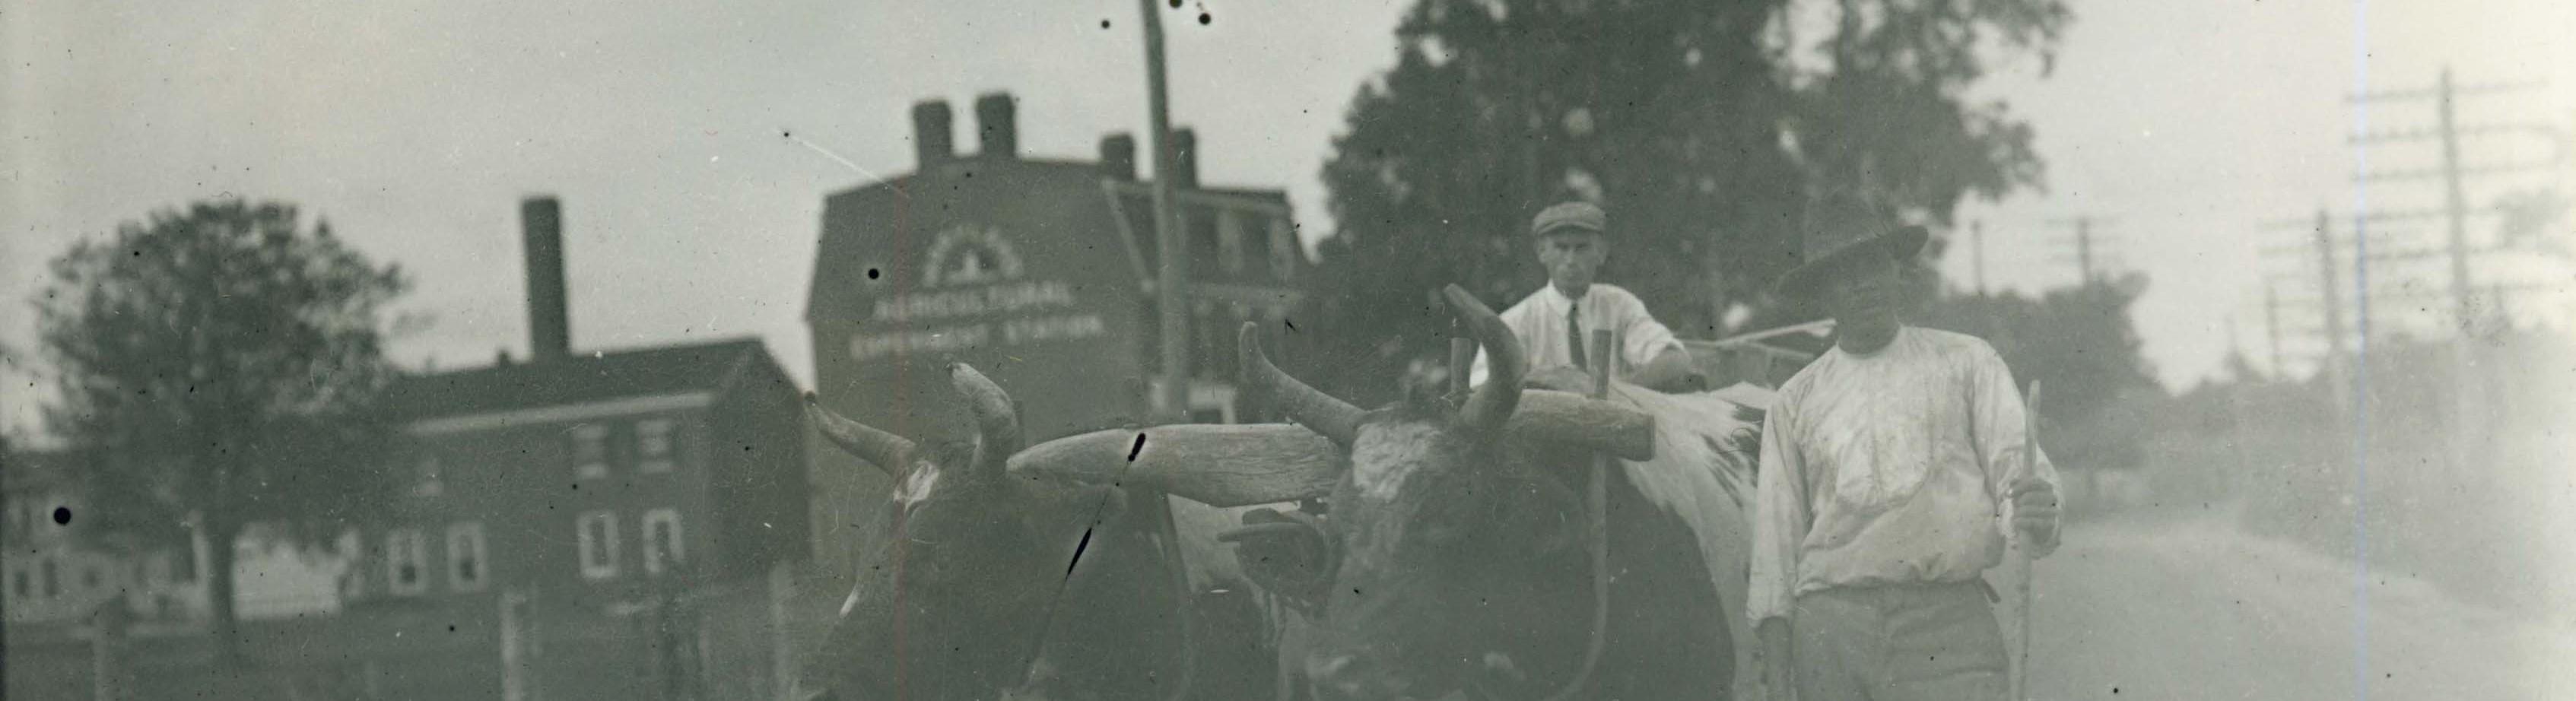 Black man standing in front of oxcart being driven by a white man